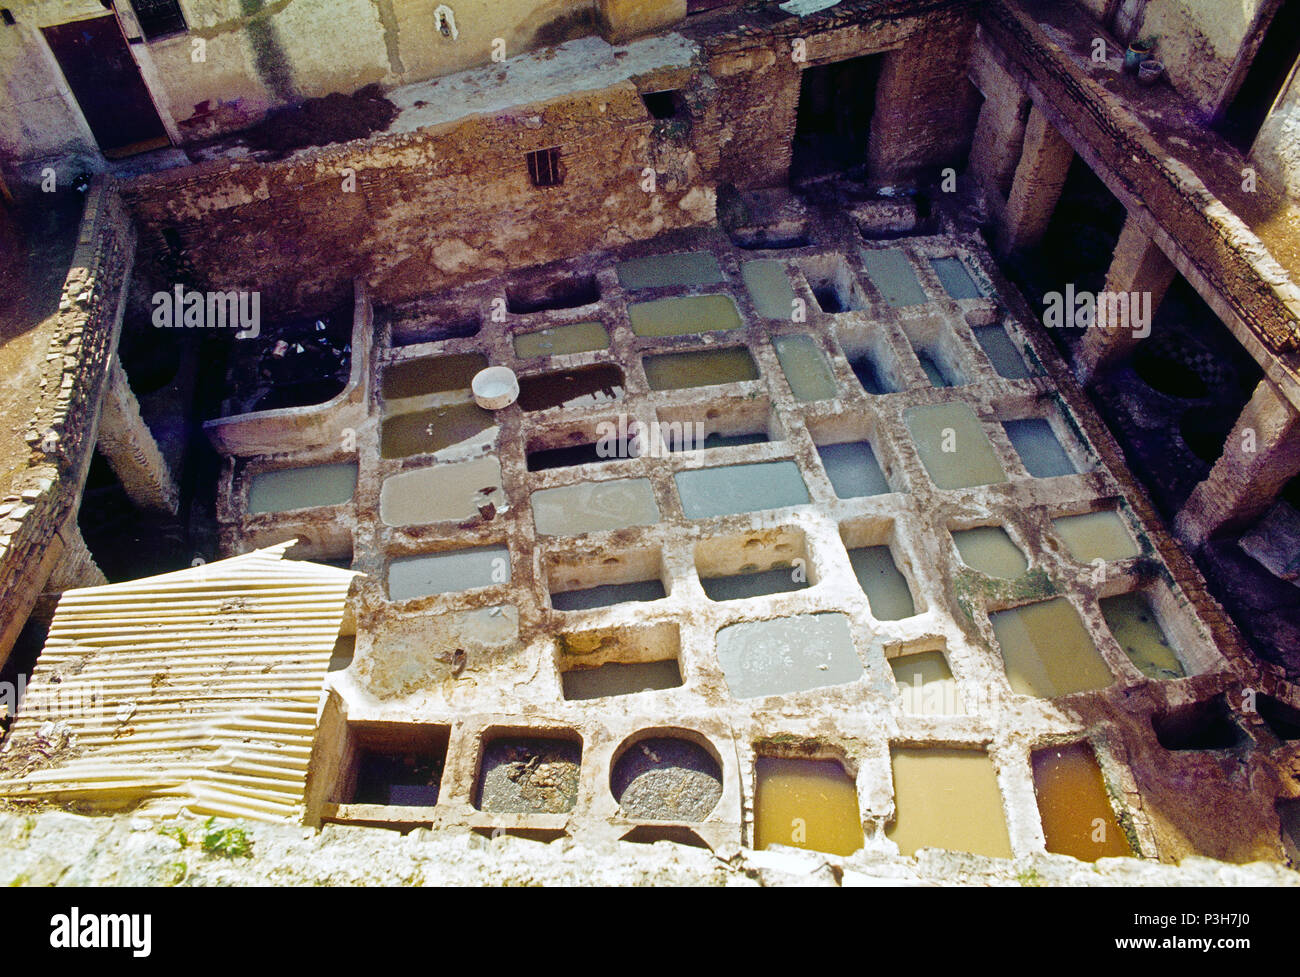 In the old town of Fes, visitors can take a look at the work in leather tanneries. For centuries, animal hides with bird dung stain and natural alkalis have been processed into finished leather in traditional way in pits in the ground and clay basins, analogue undated image from March 1985. Photo: Matthias Toedt/dpa-Zentralbild/ZB/Picture Alliance | usage worldwide Stock Photo